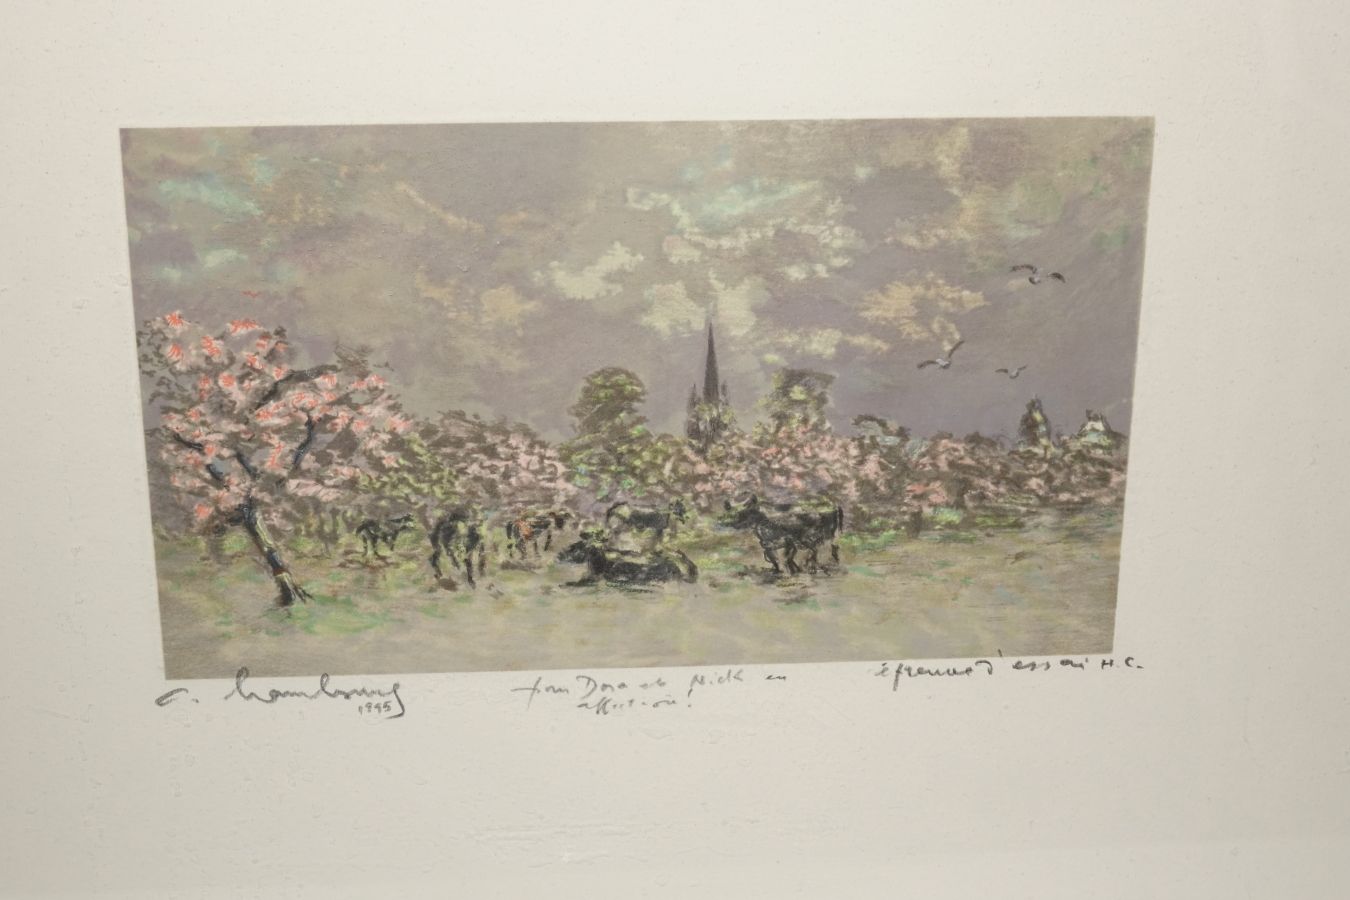 Null HAMBURG André (1909- 1999)

Cows under apple trees

Colour lithograph, proo&hellip;